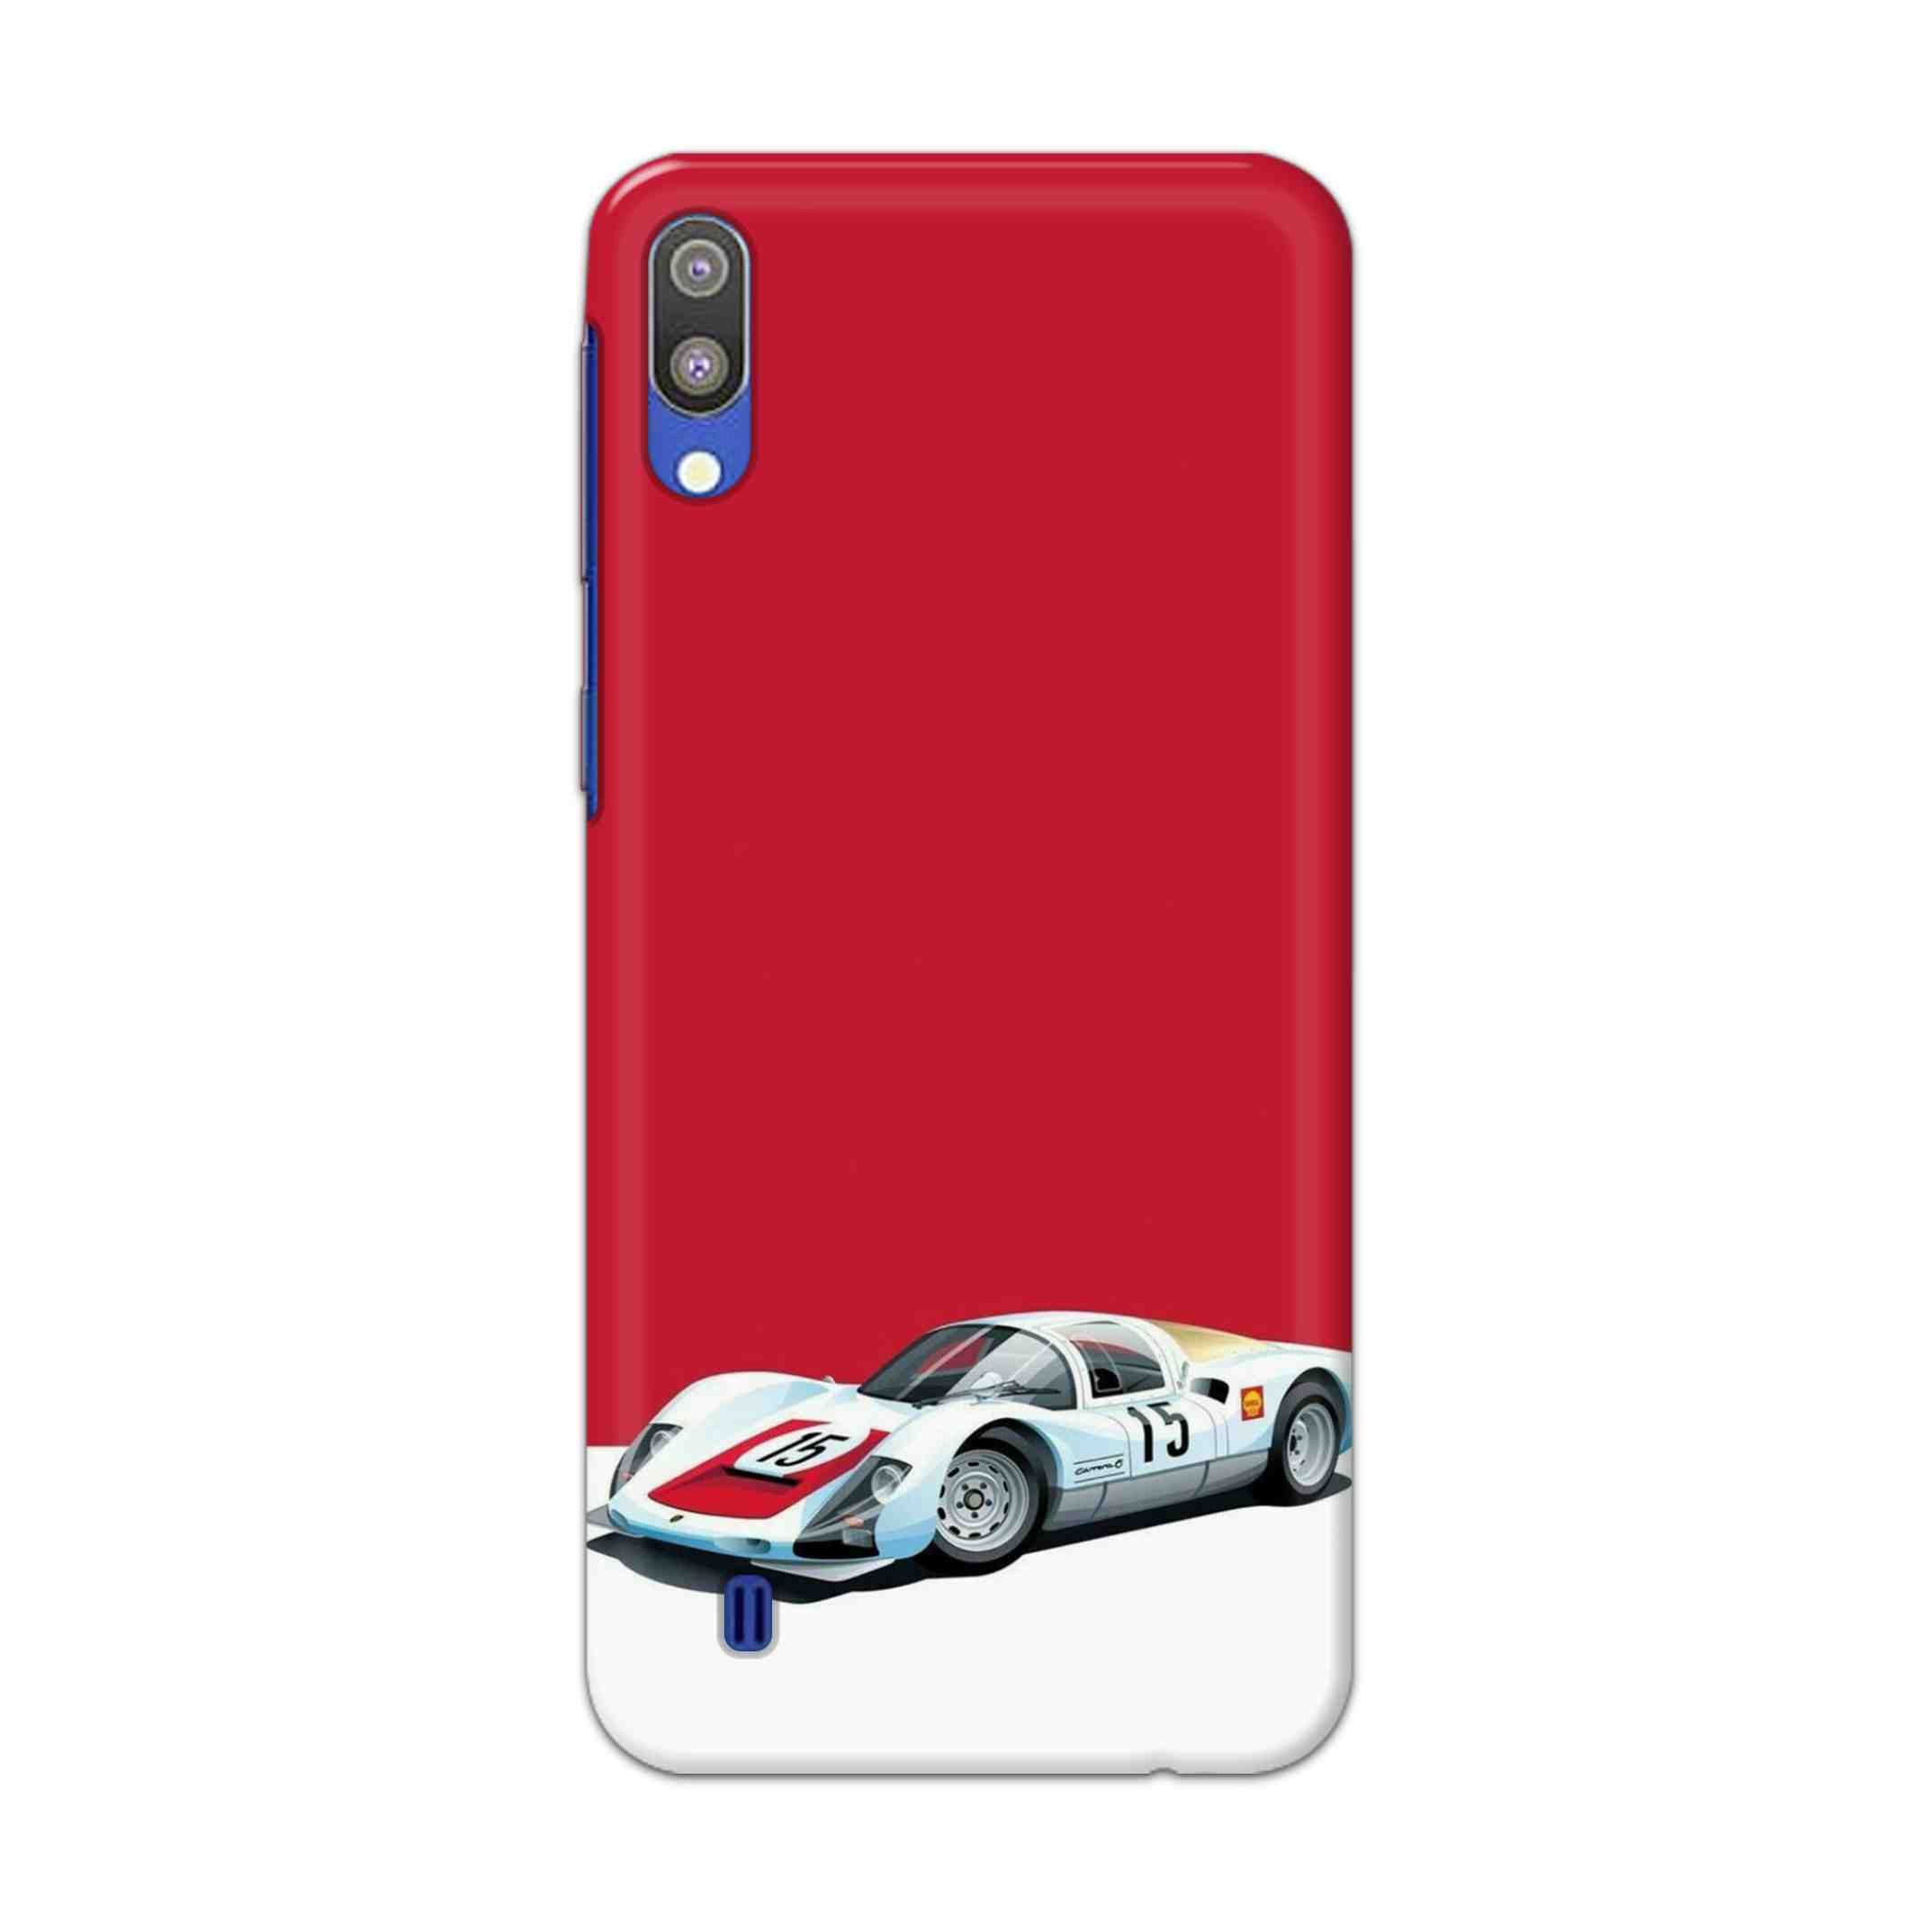 Buy Ferrari F15 Hard Back Mobile Phone Case Cover For Samsung Galaxy M10 Online